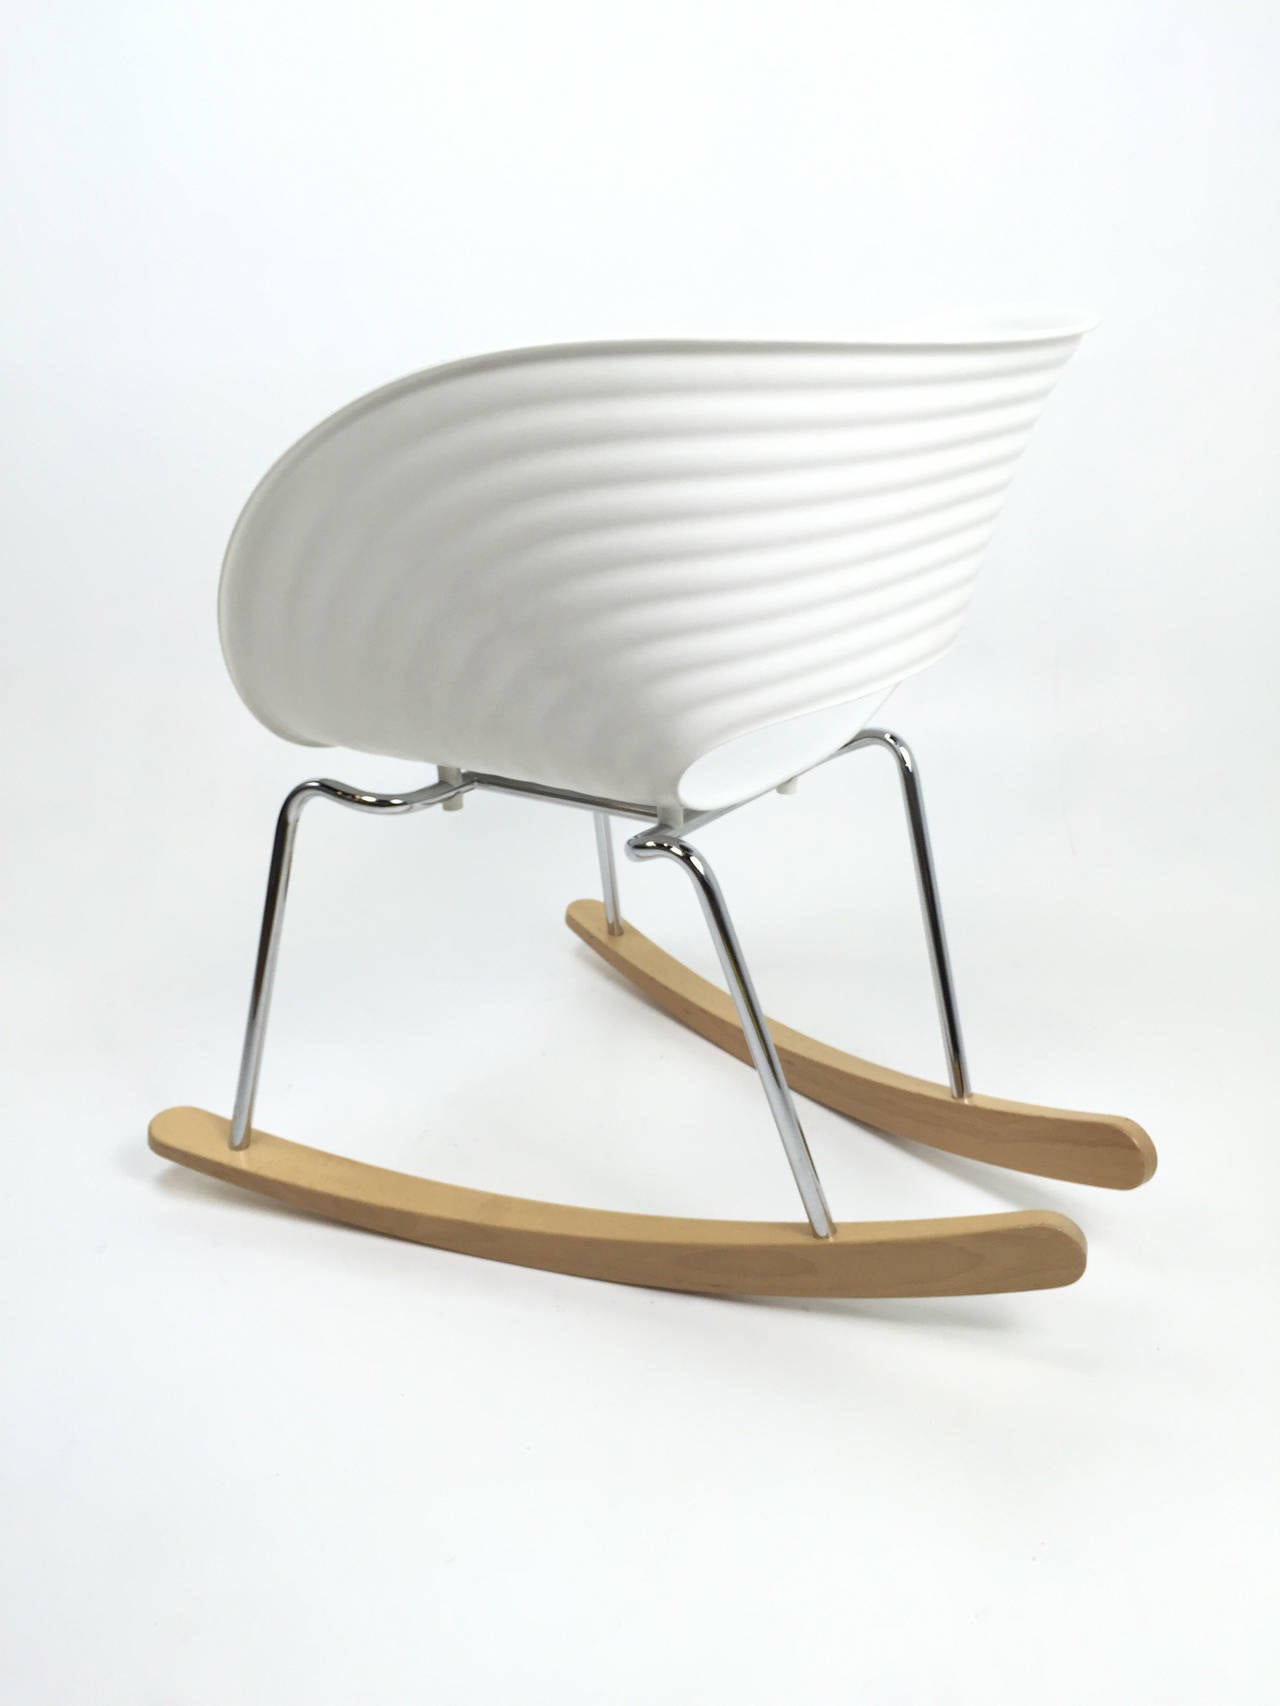 Rod Arad injection molded plastic rocking chair 